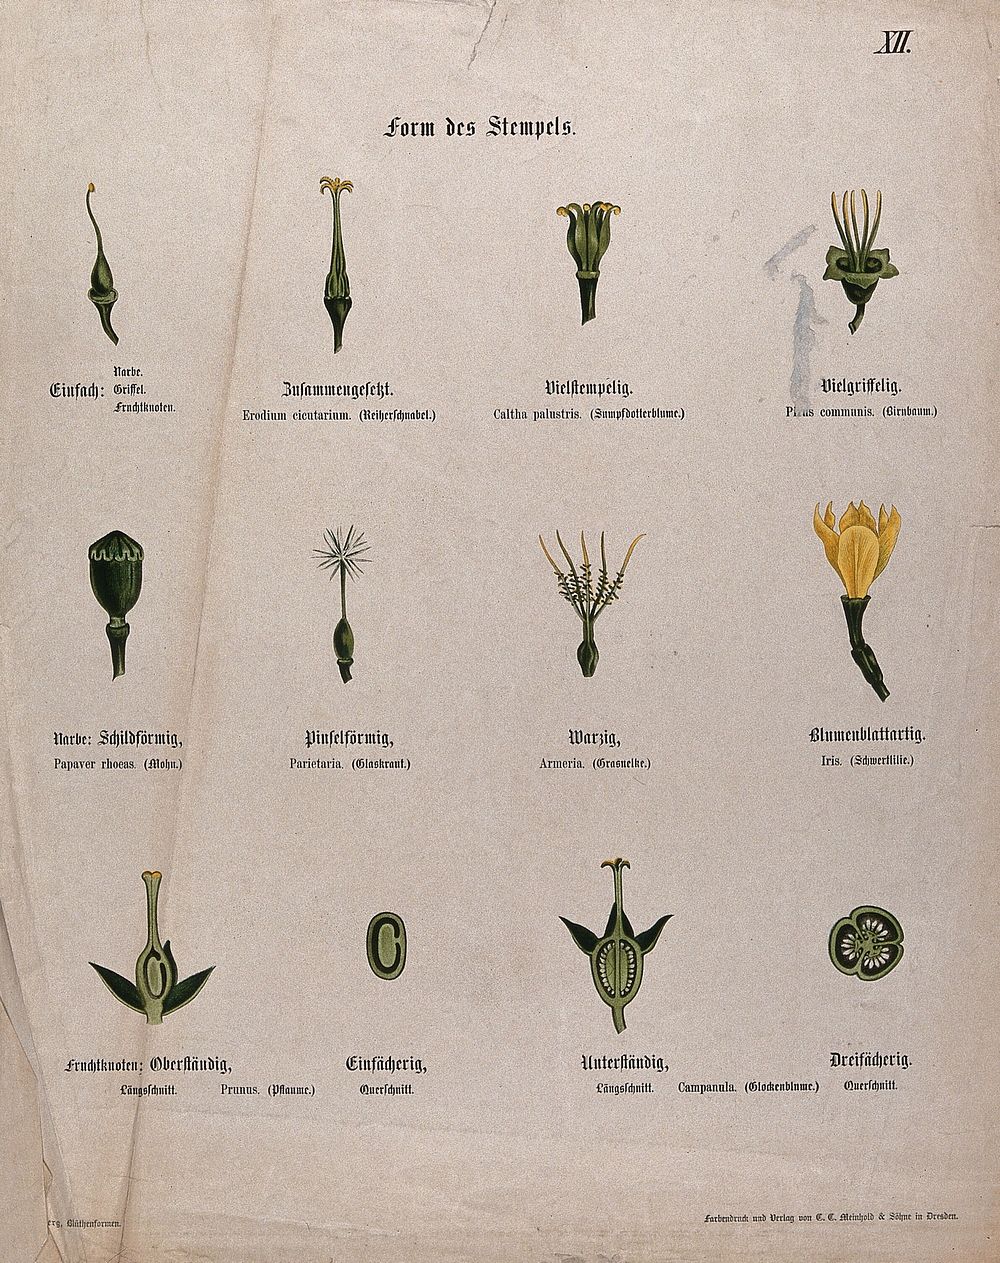 Twelve examples of different types of flower pistil. Chromolithograph, c. 1850.